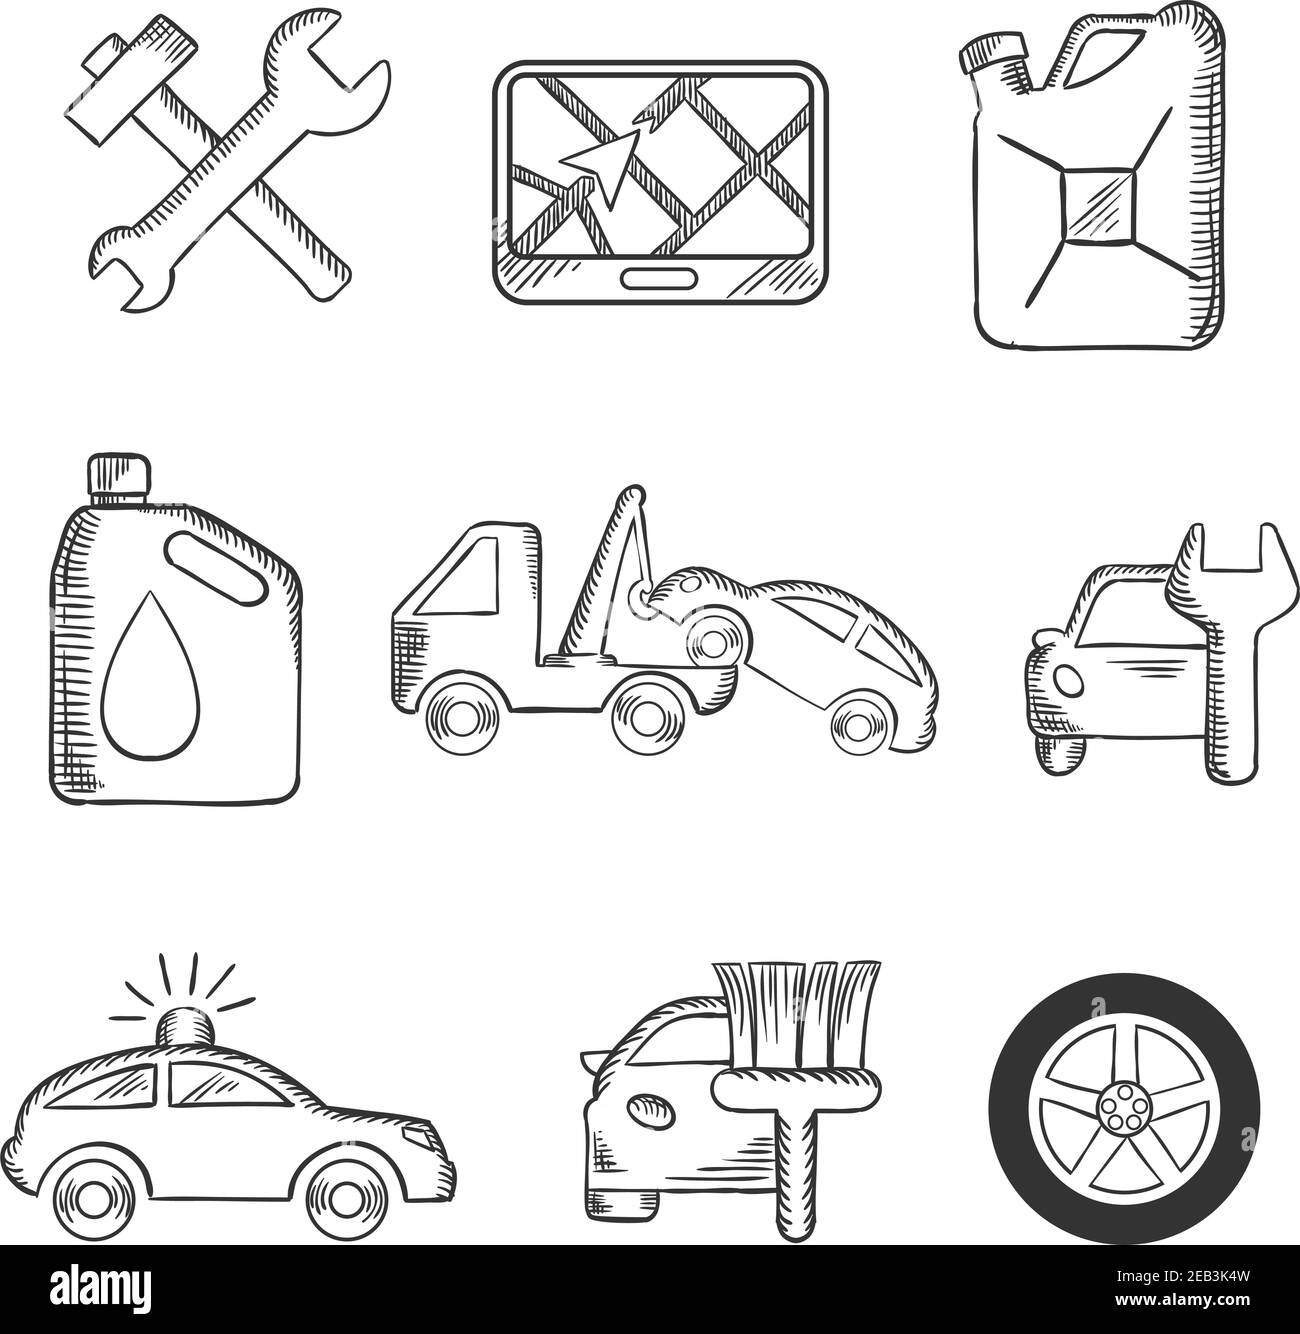 Car service sketch icons including tools, road sign, oil and petrol containers, tow truck, wheel, tyre, jerry can, police, car wash and garage Stock Vector